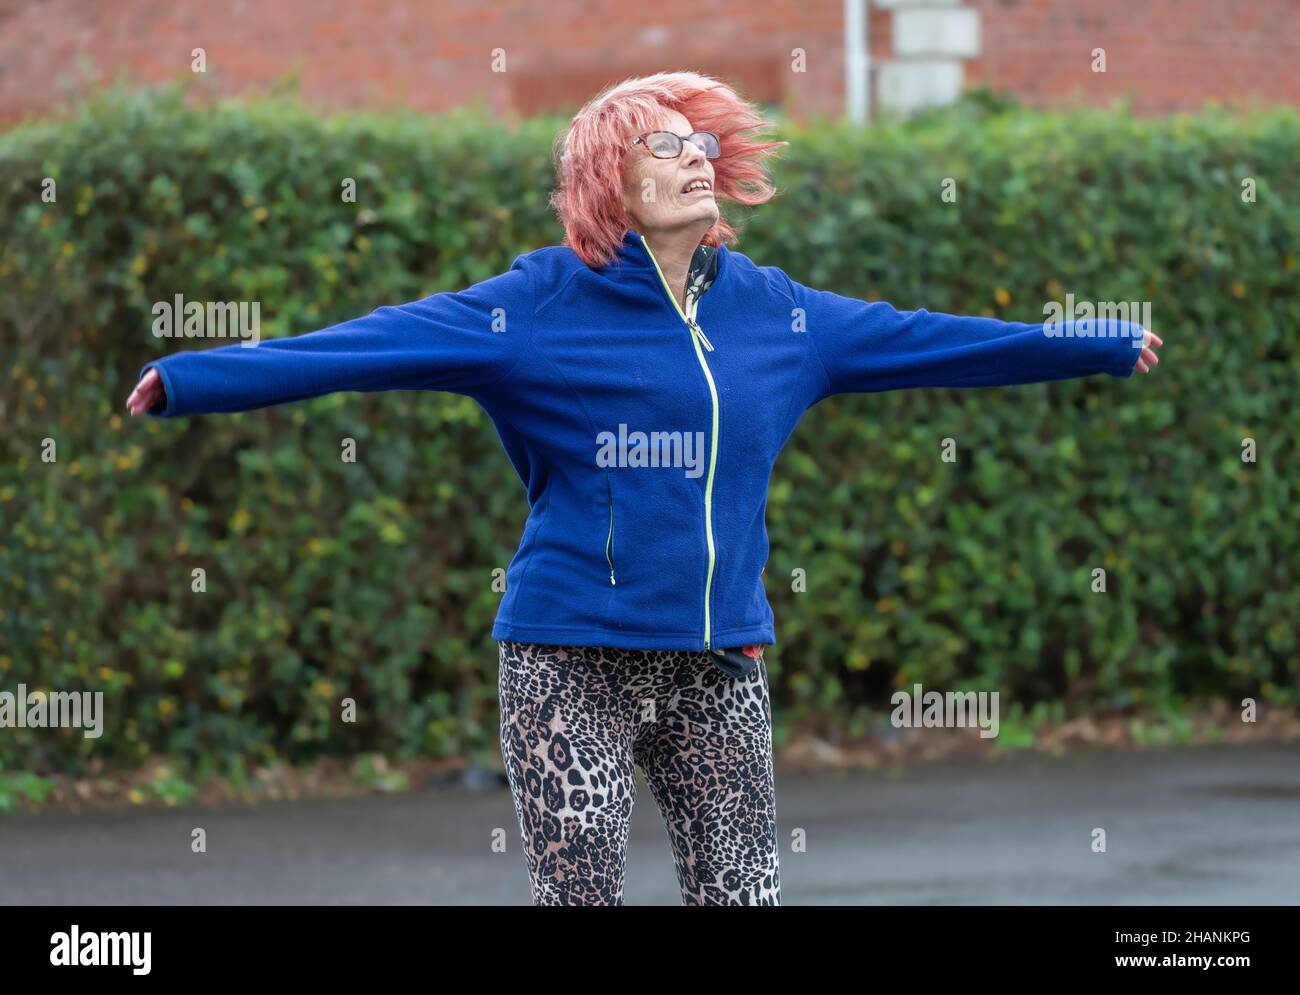 Elderly senior woman in her 80s exercising outside doing star jumps in Winter. Old lady keeping an active healthy lifestyle. Stock Photo